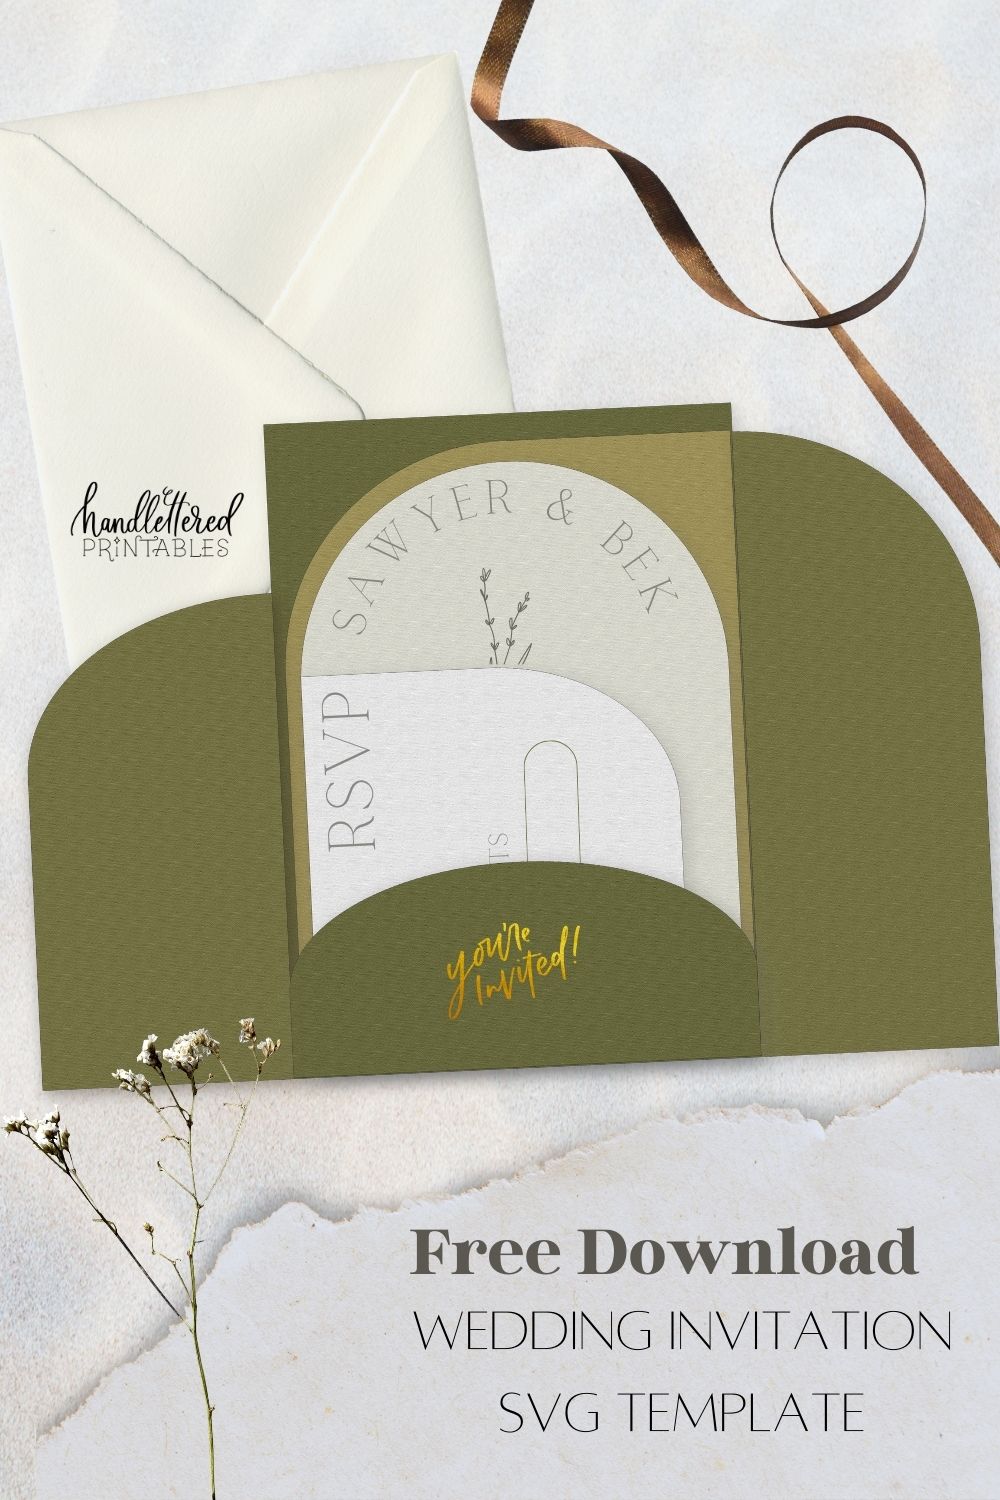 Free Wedding Invitation Cut file- green and grey trifold pocket invitations with arch inserts